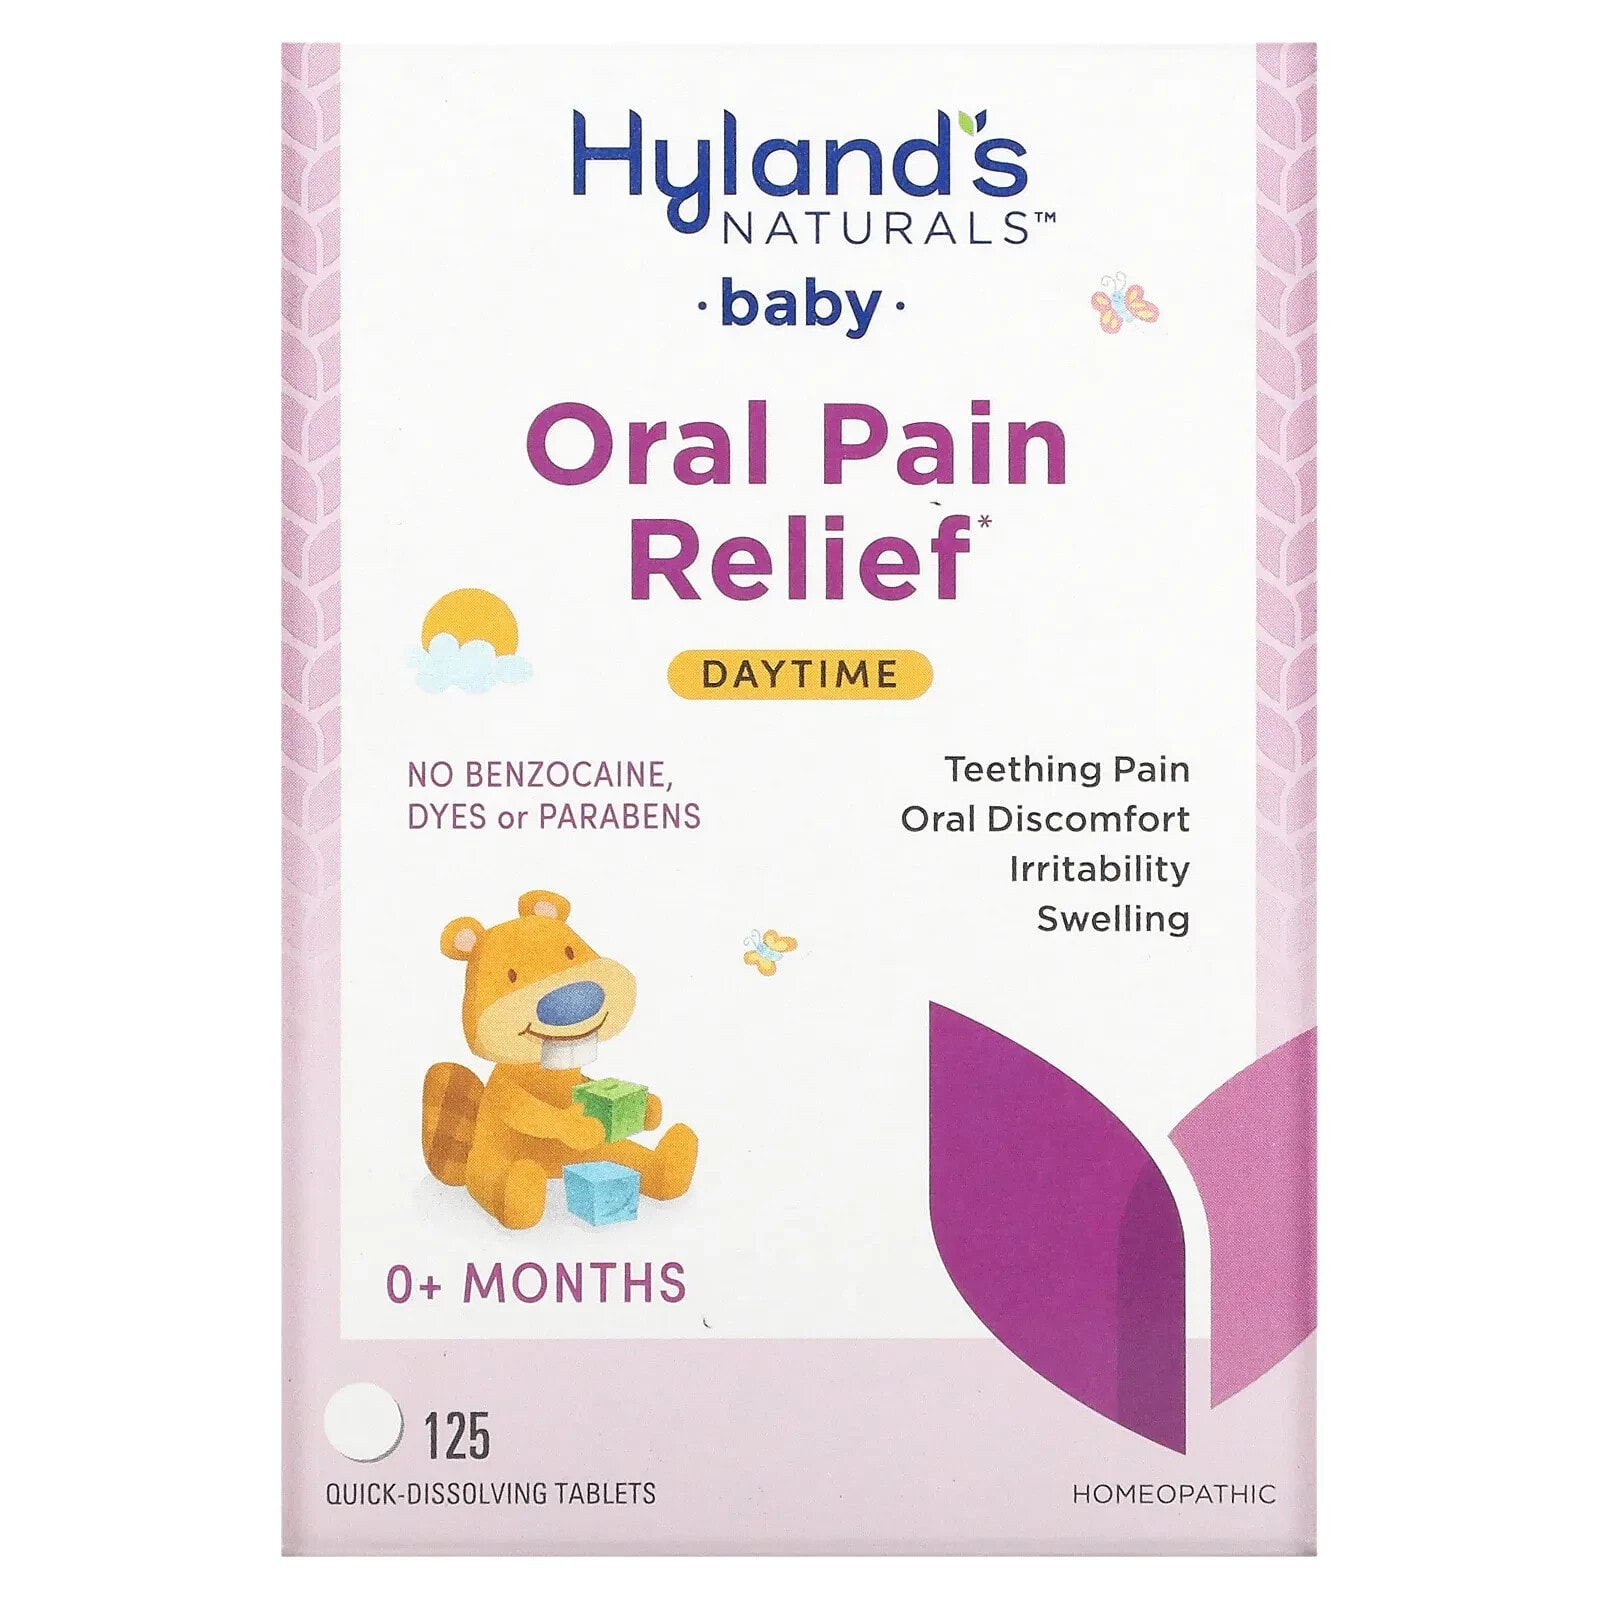 Hyland's Naturals, Baby, Oral Pain Relief, Daytime, 0+ Months, 125 Quick-Dissolving Tablets